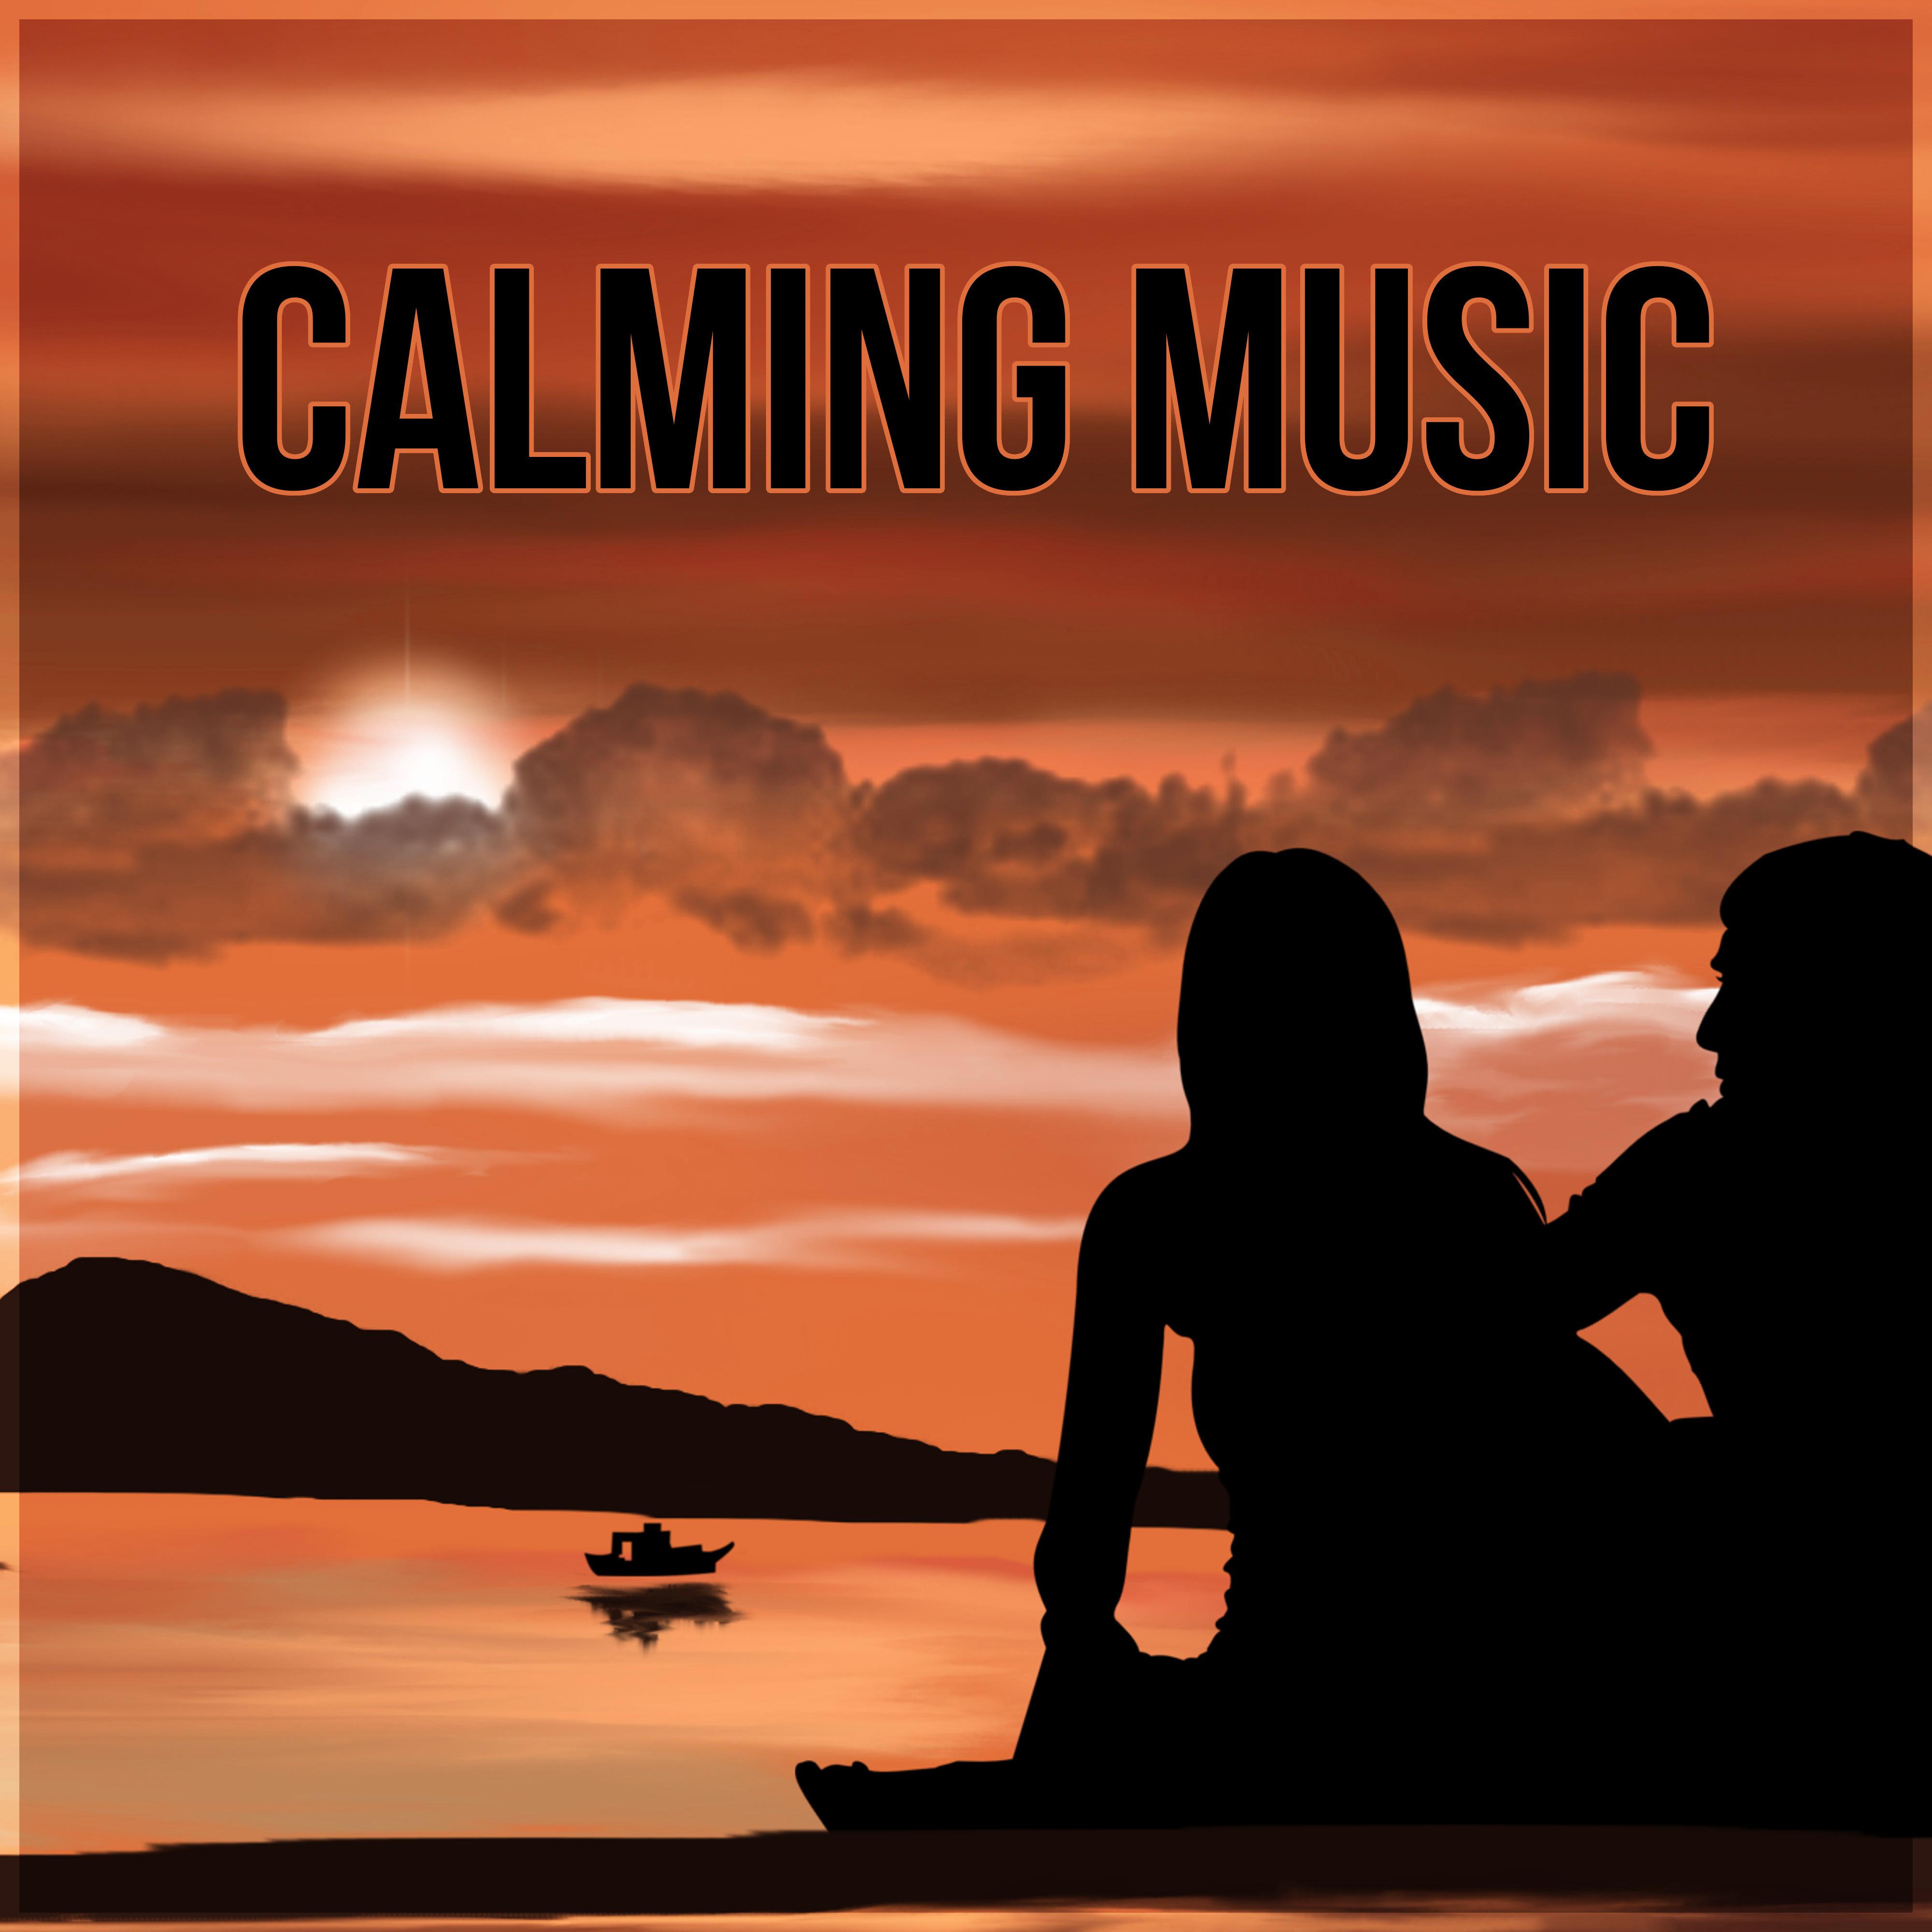 Calming Music  Take Your Time, Endlessly Soothing Music, Mindfulness Meditation Spiritual Healing, Relax Yourself